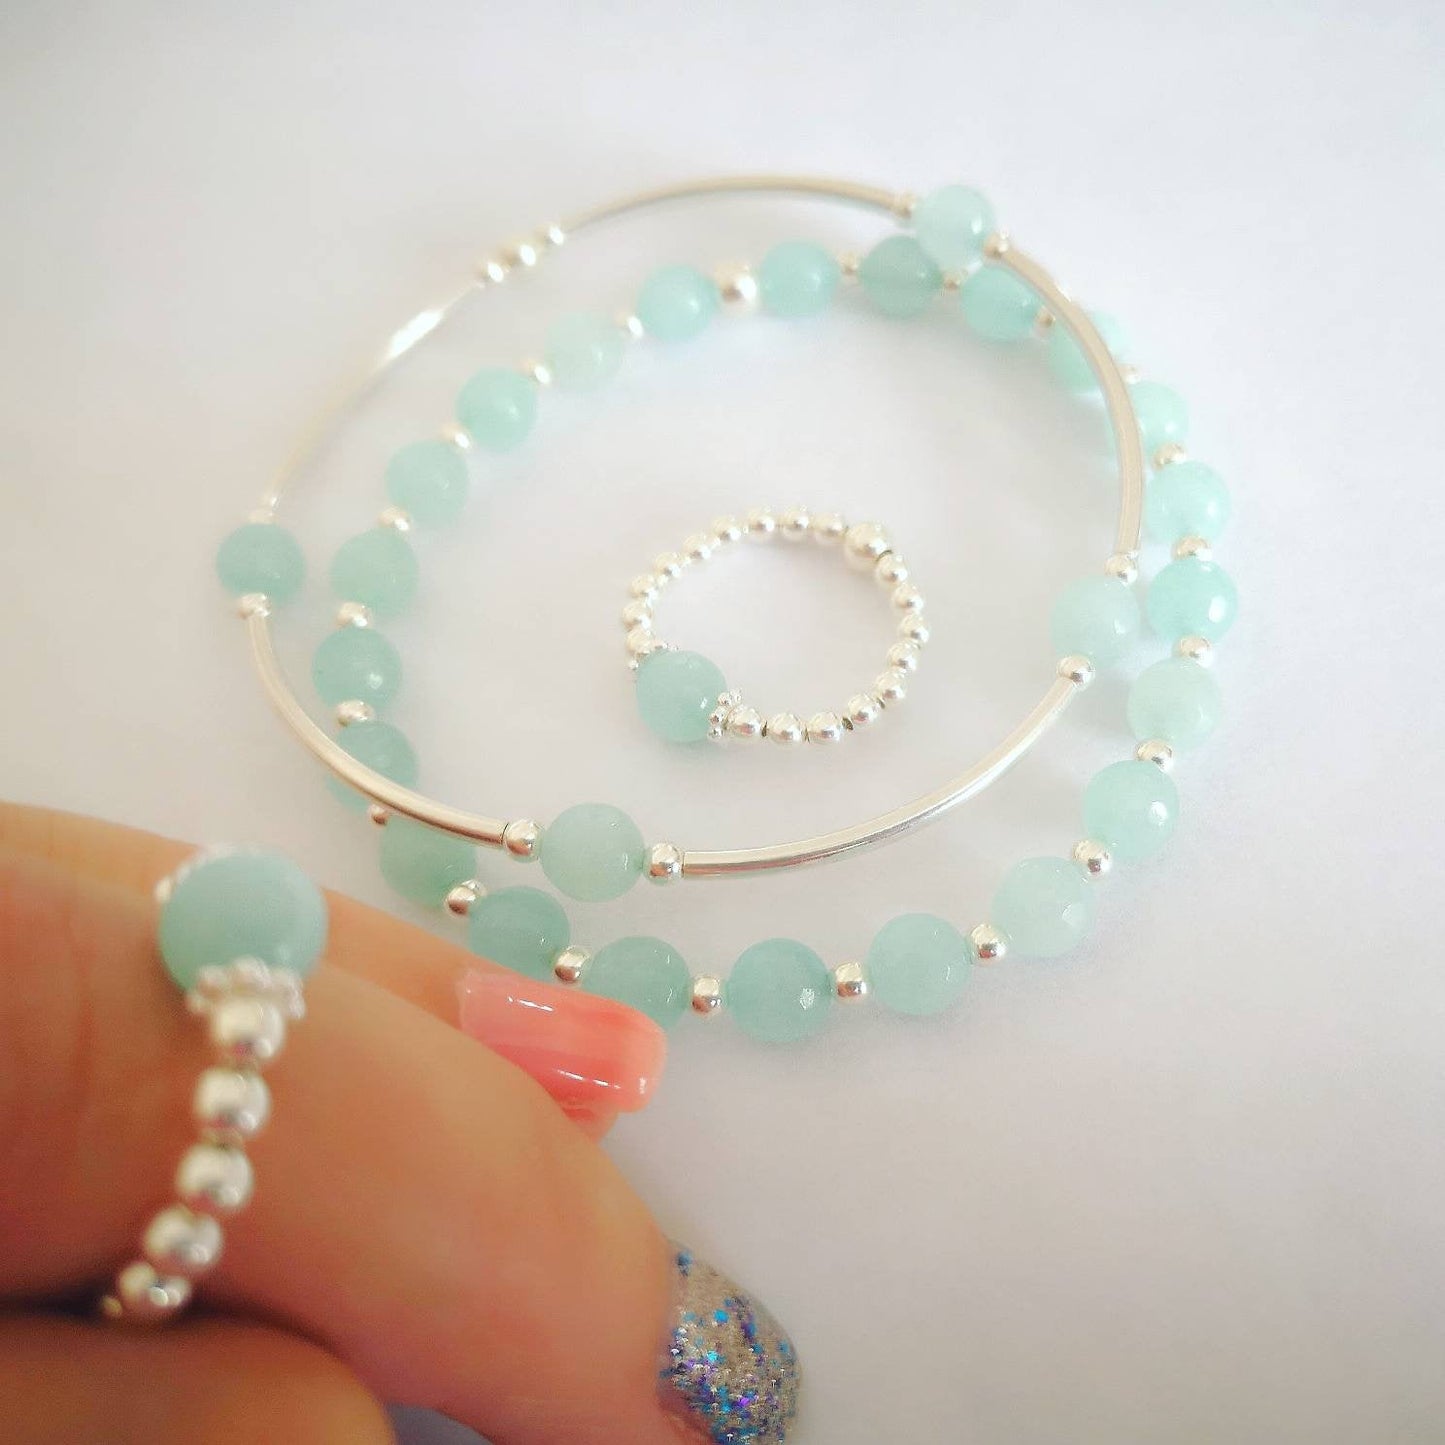 Aquamarine Amazonite and Sterling Silver Noodle Stretch Bracelet - With Love Jewellery UK